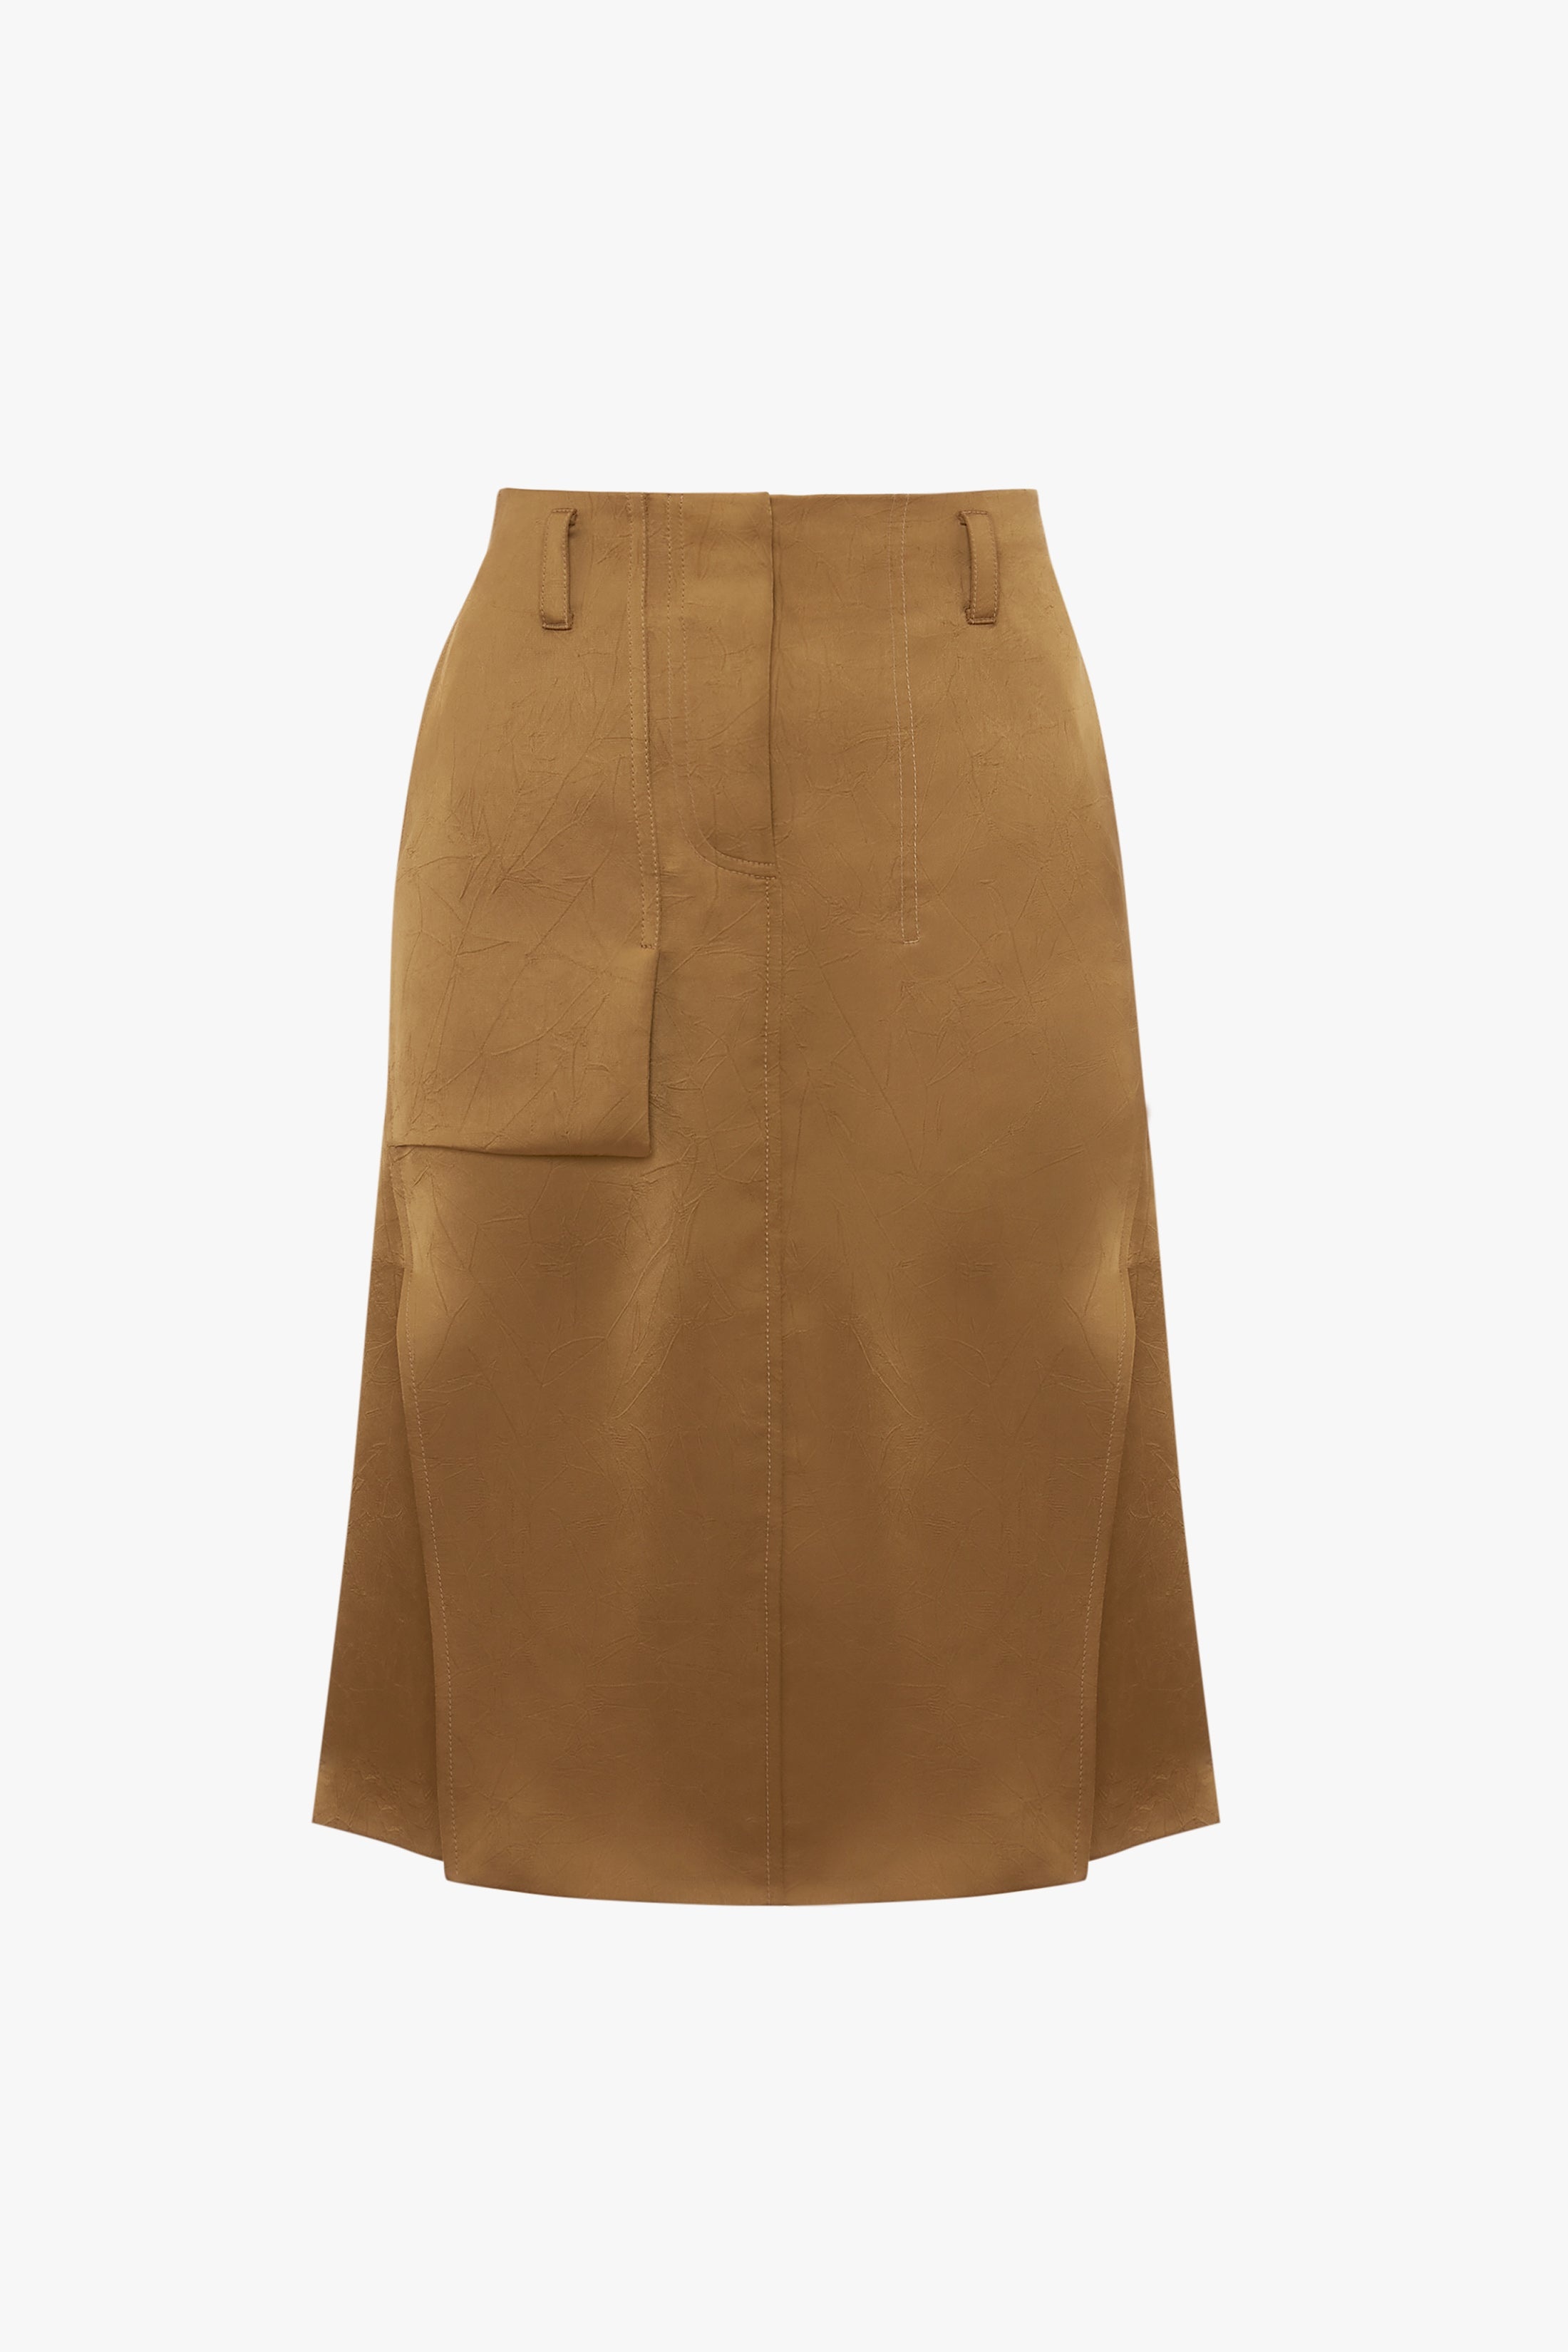 Utility Skirt In Tawny Brown - 1